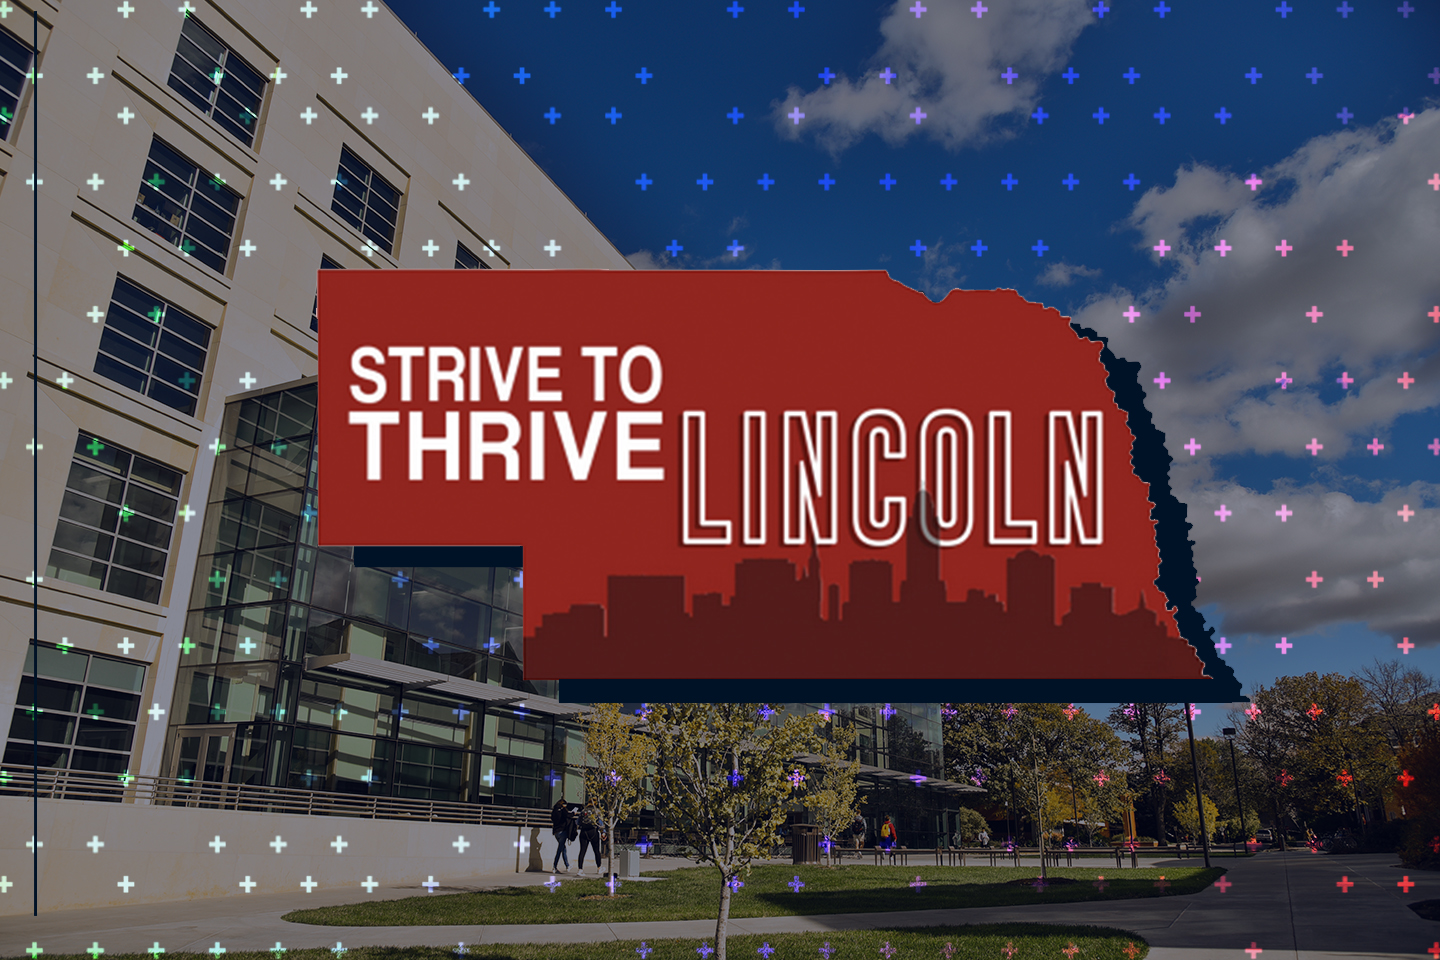 Strive to Thrive Student Blog - Spring 2021